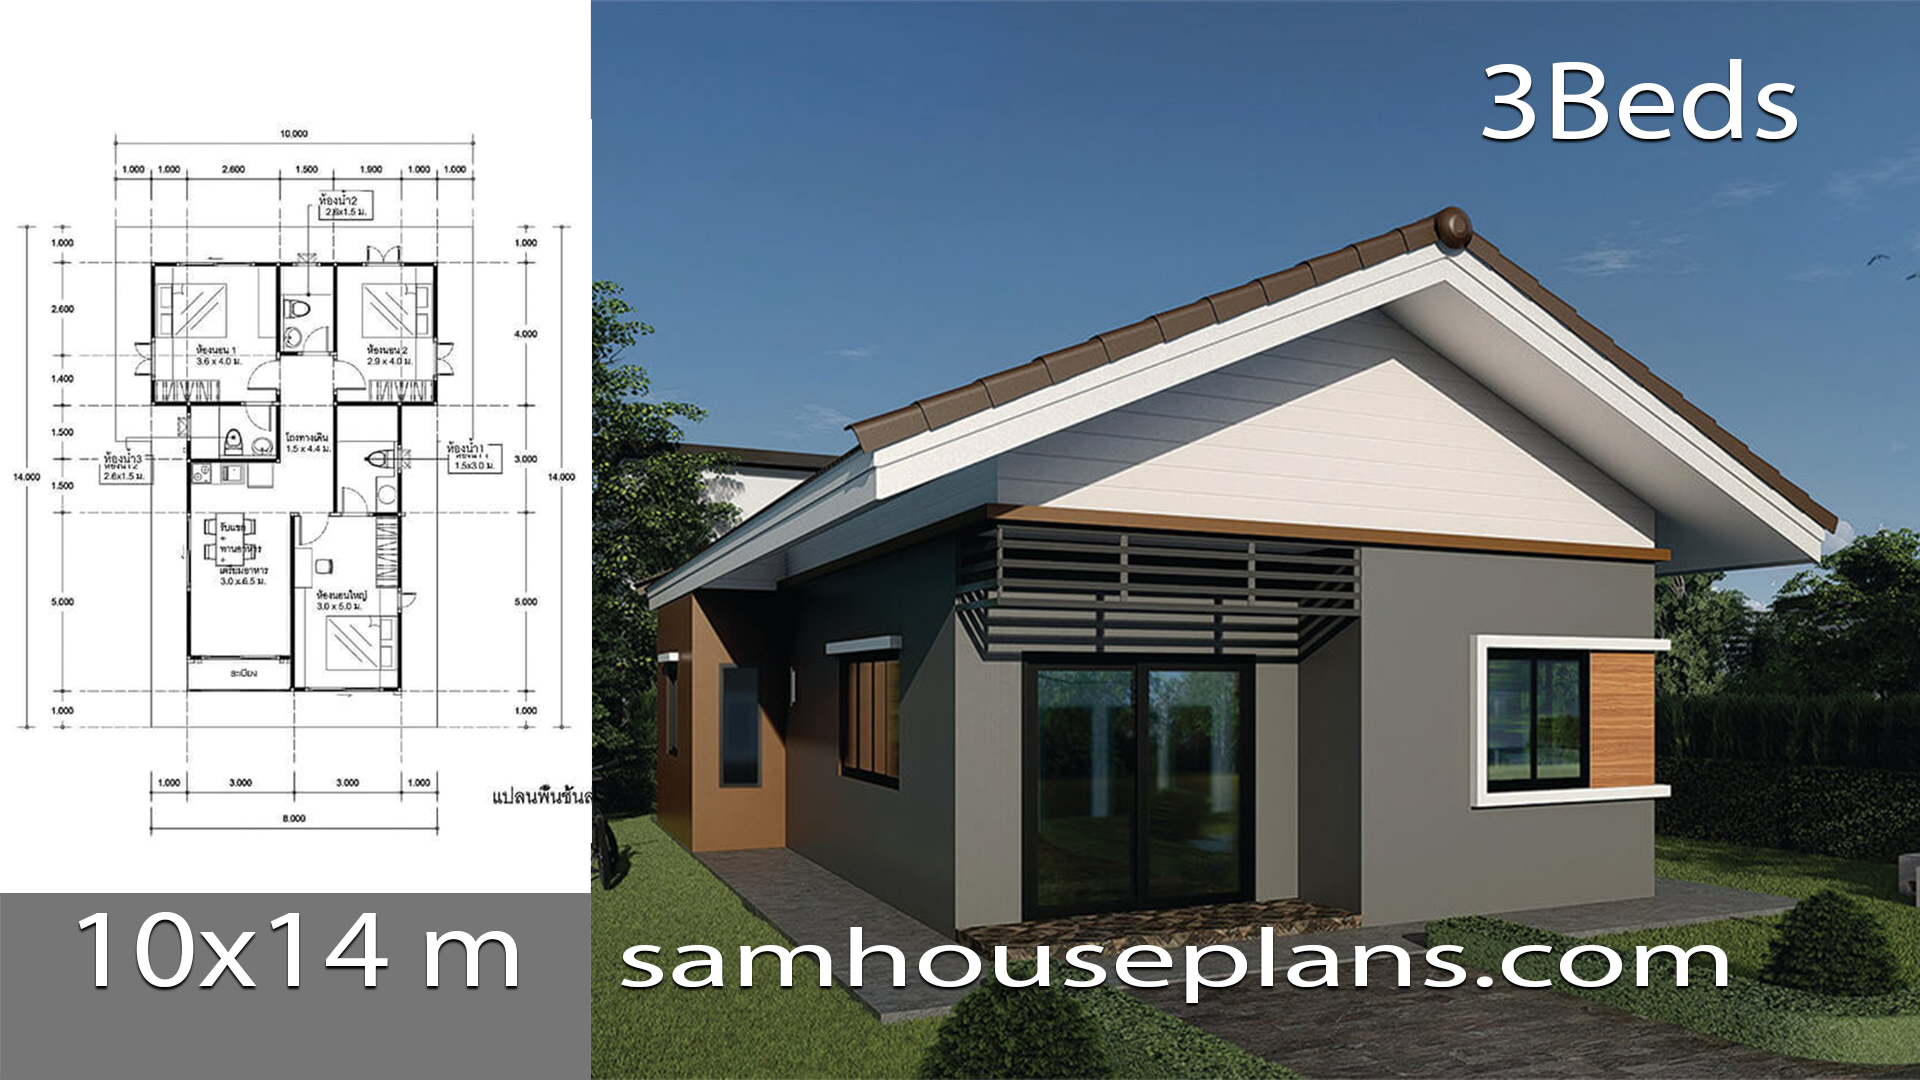 House plans Ideas 10x14m with 3 bedrooms